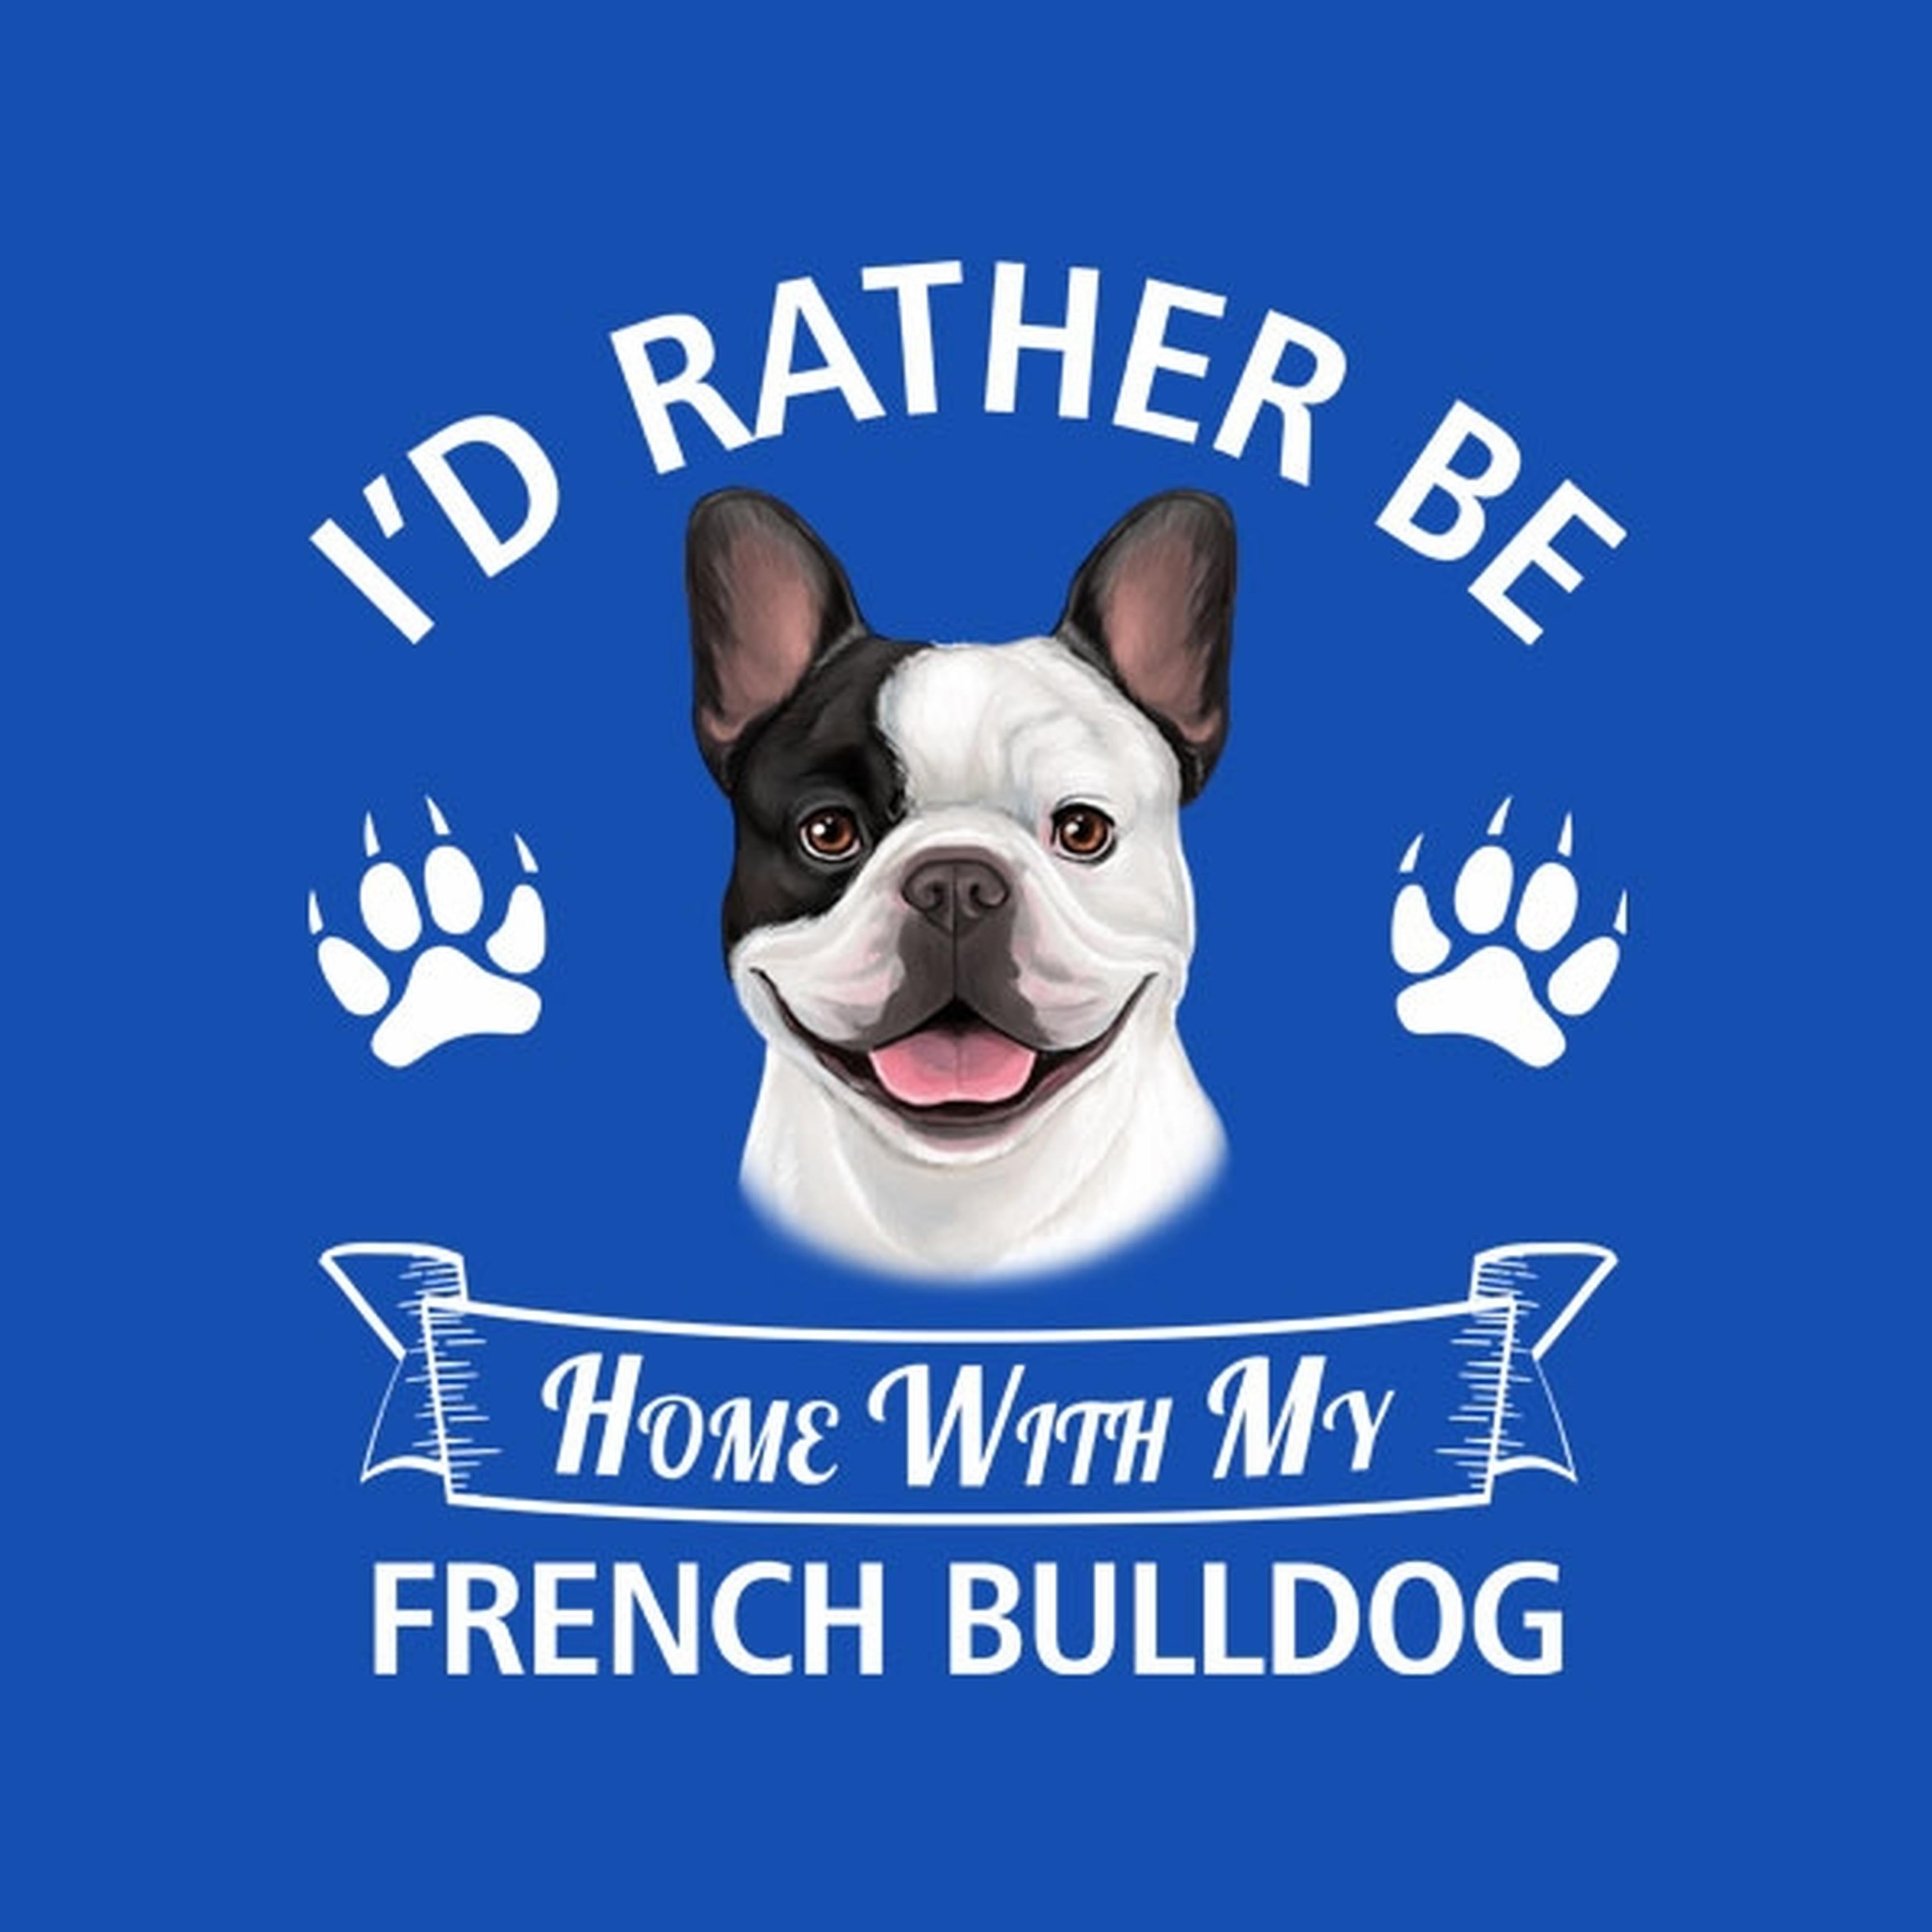 I'd rather stay home with my French Bulldog - T-shirt